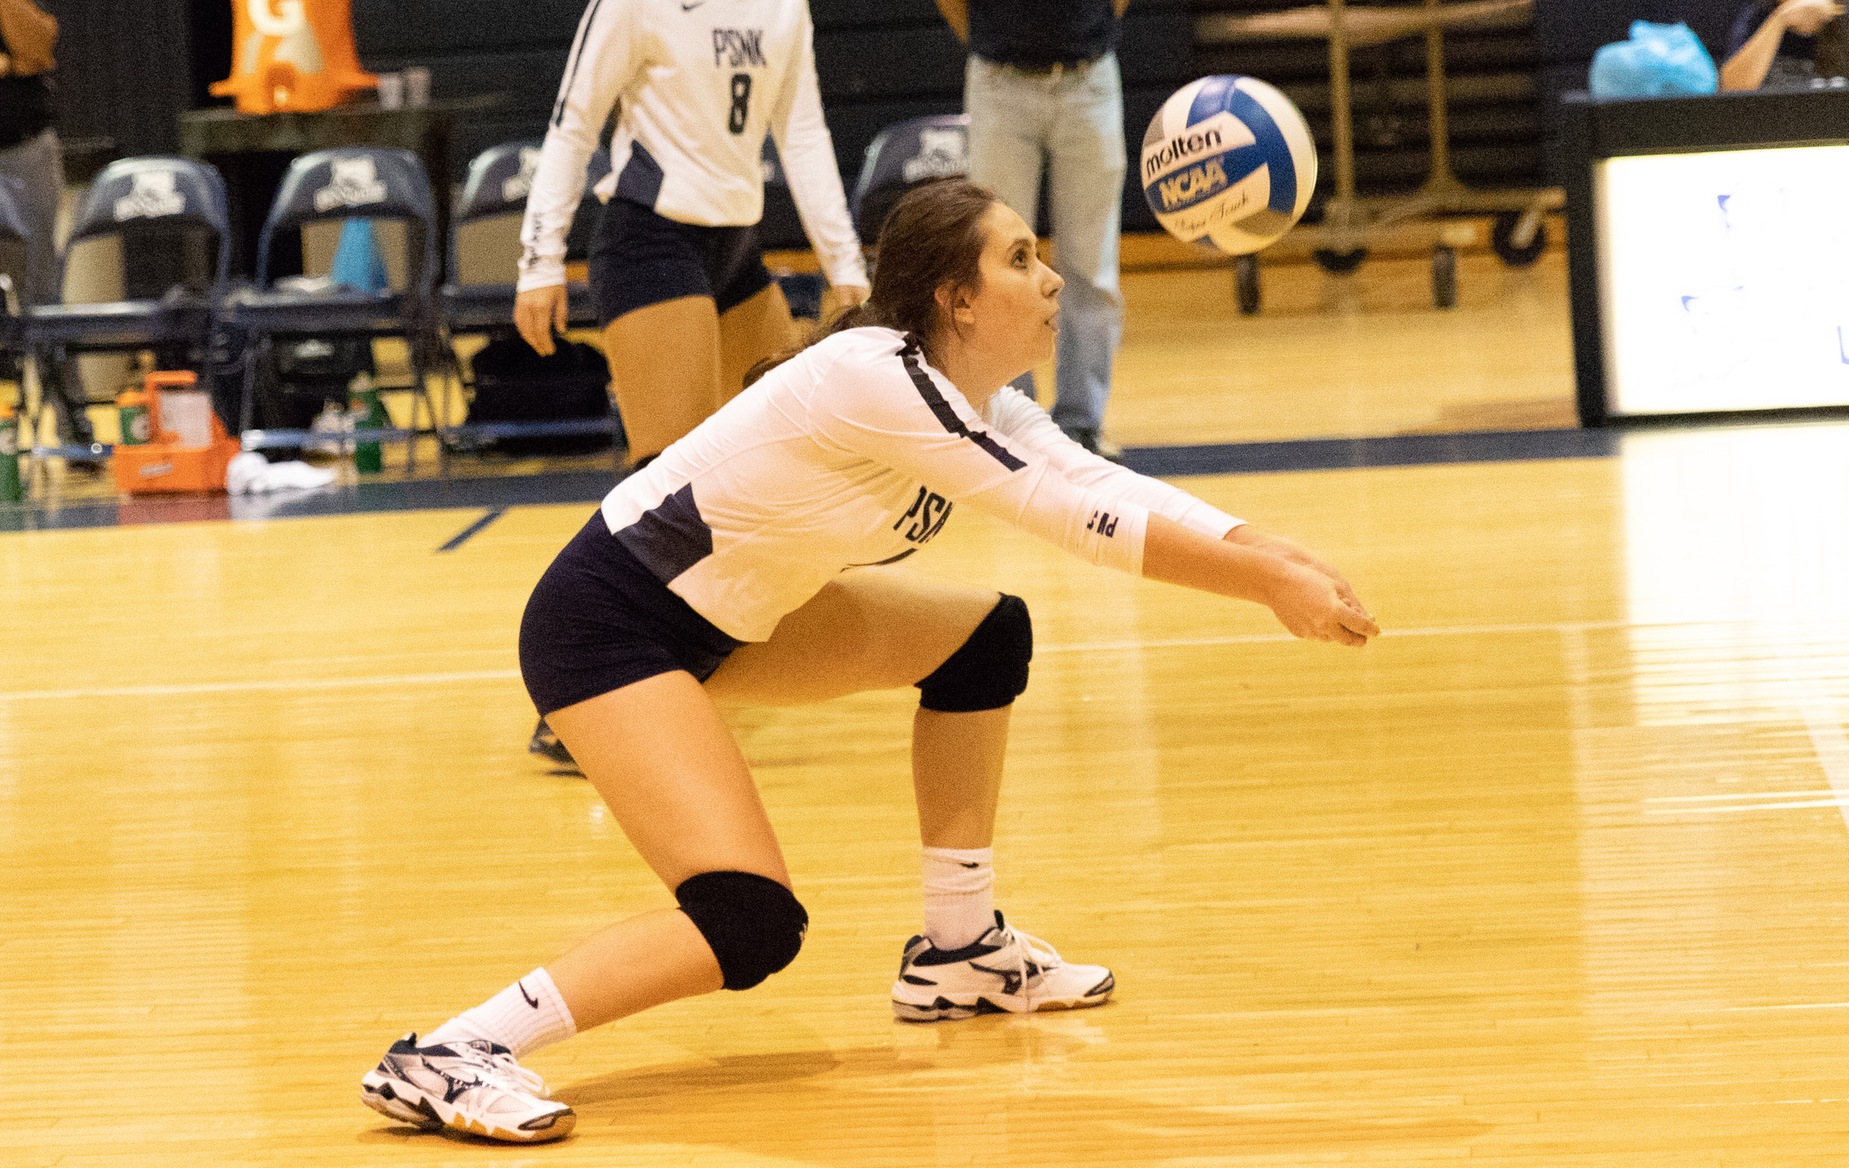 Women’s Volleyball Brings Home a Win